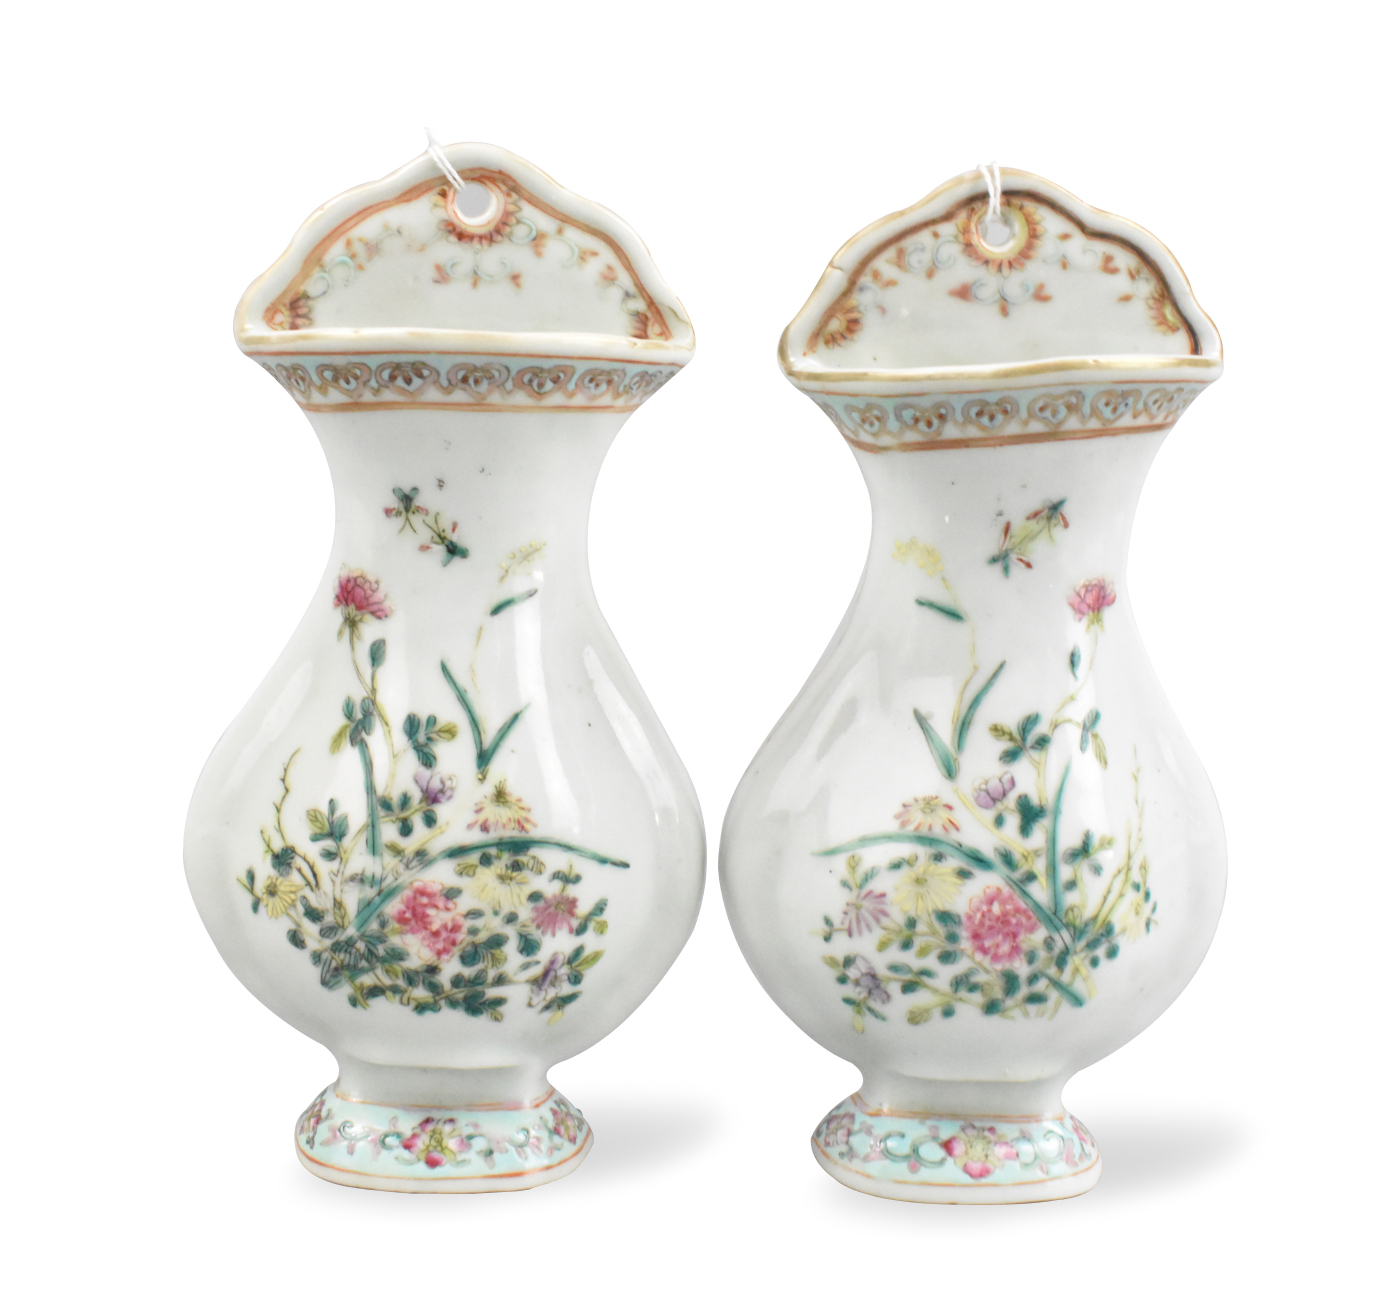 PAIR OF CHINESE FAMILLE ROSE WALL 33a352